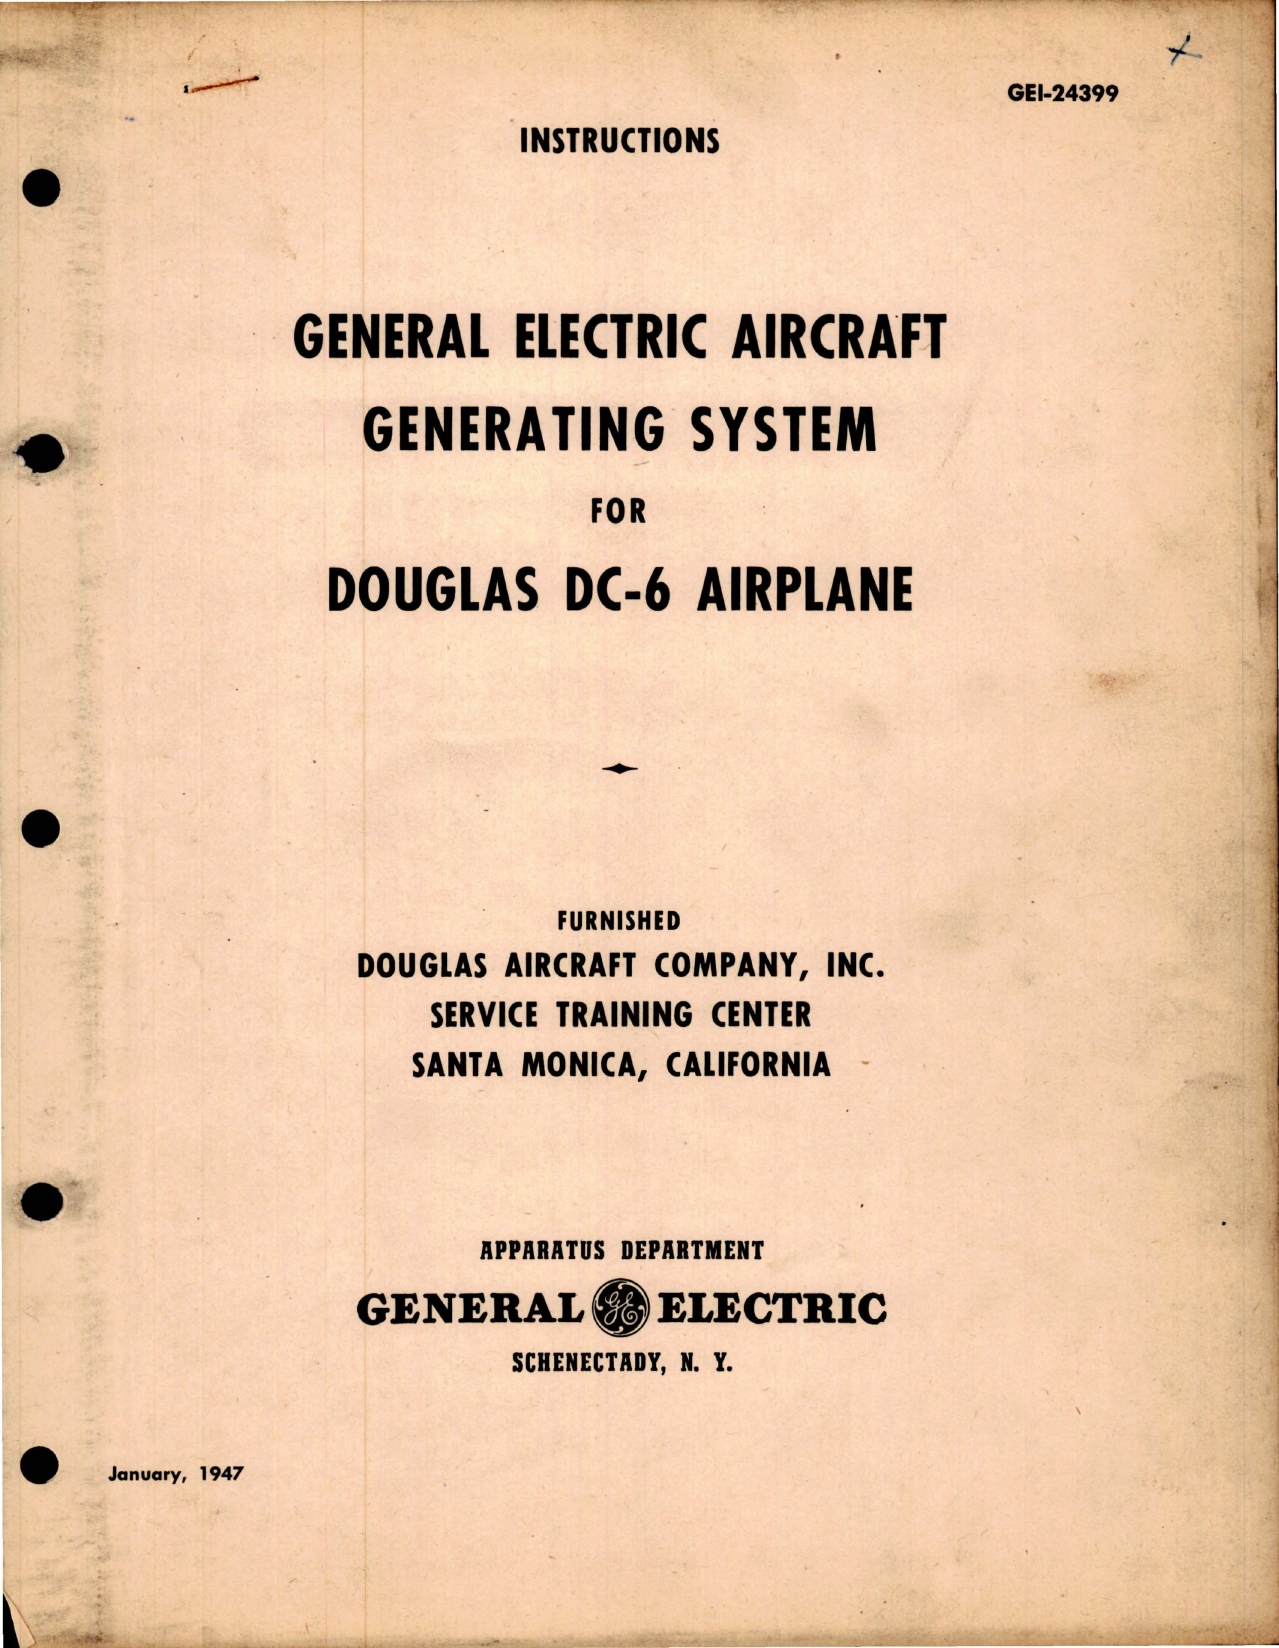 Sample page 1 from AirCorps Library document: Instructions for General Electric Generating System for Douglas DC-6 